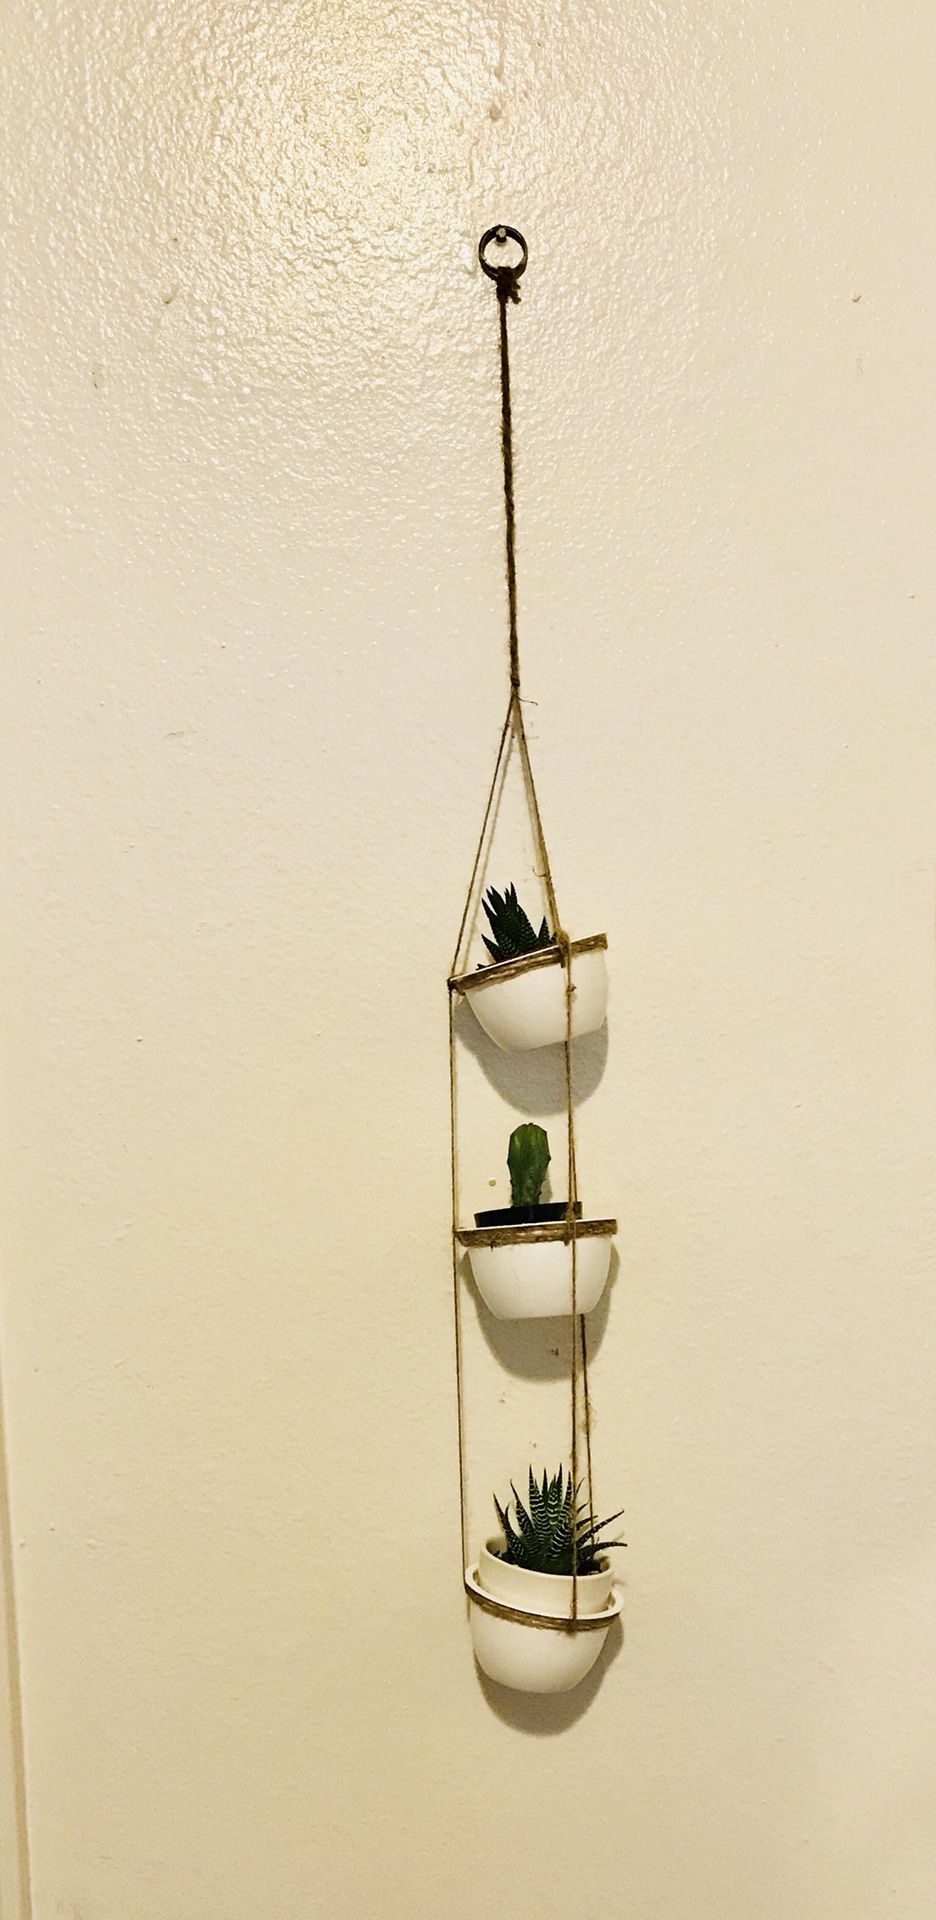 HAnging planter for 3 small succulents, made of plastic & rope. NEW!